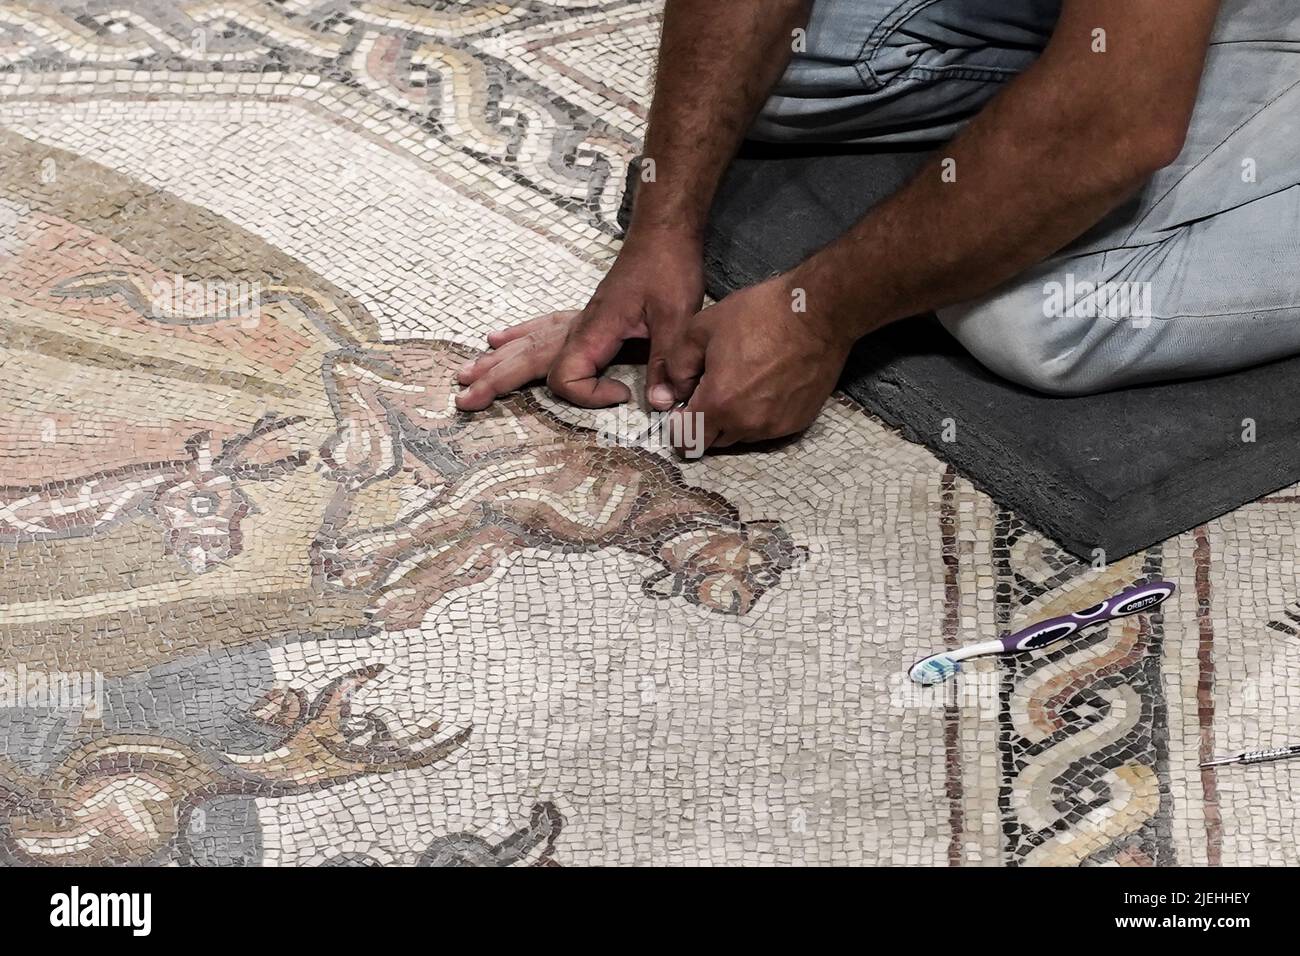 Lod, Israel. 27th June, 2022. Workers conduct last minute cleanup before the Israel Antiquities Authority inaugurates the Shelby White and Leon Levy Lod Mosaic Archaeological Center. The center's goal is to display a 1,710 square foot, Roman period (3rd to 4th century CE) mosaic which served as the floor of a living room villa in a wealthy housing complex in Lod. Credit: Nir Alon/Alamy Live News Stock Photo